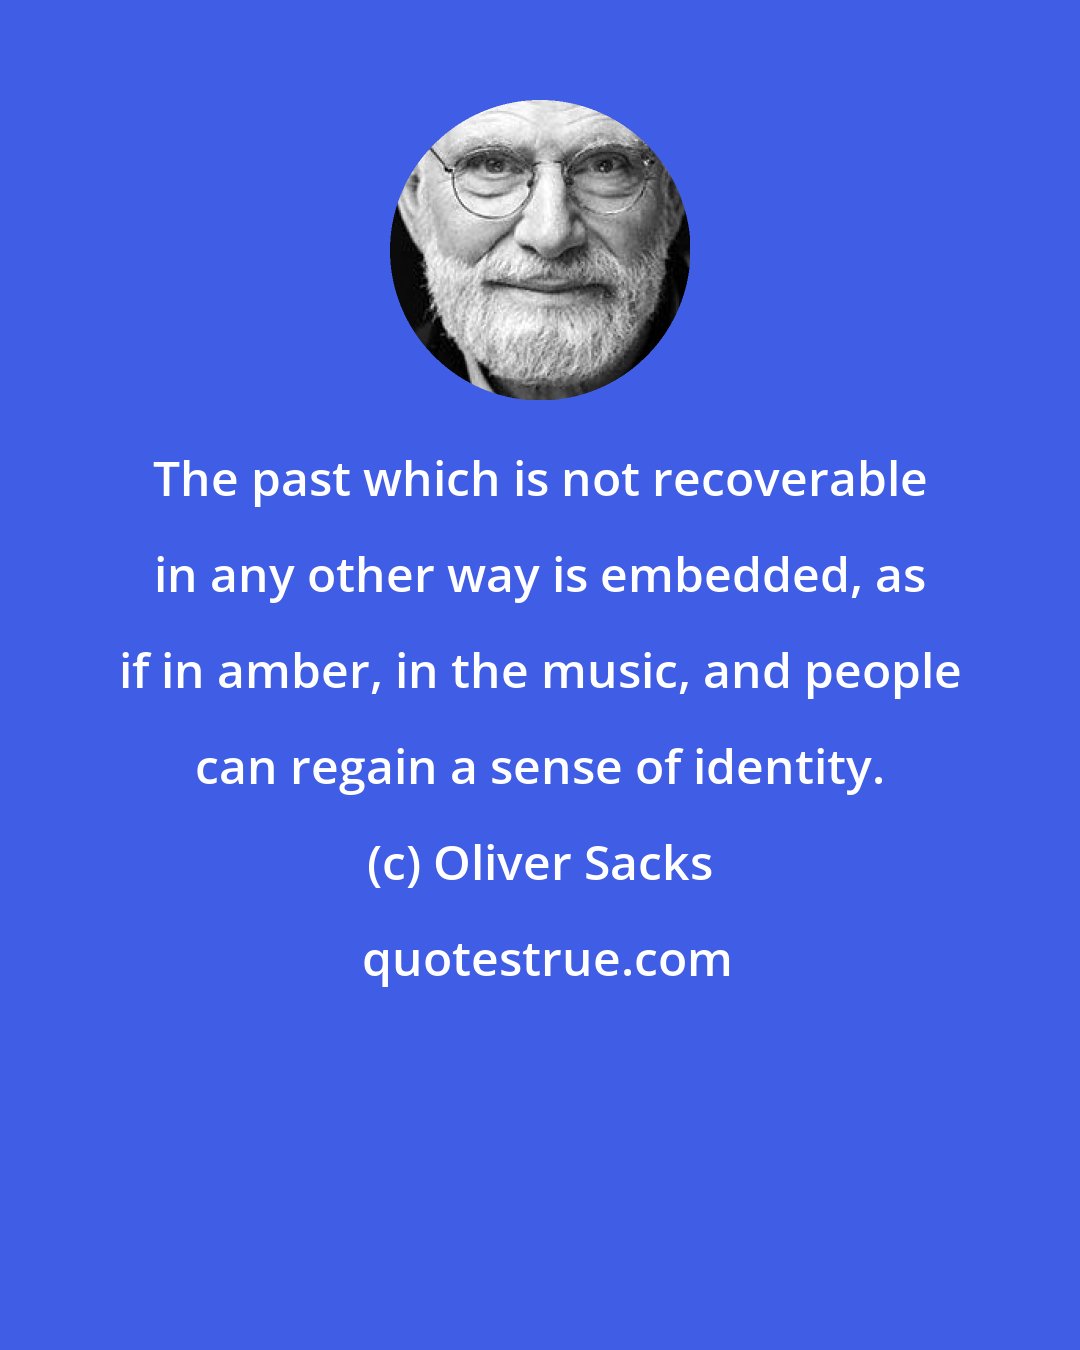 Oliver Sacks: The past which is not recoverable in any other way is embedded, as if in amber, in the music, and people can regain a sense of identity.